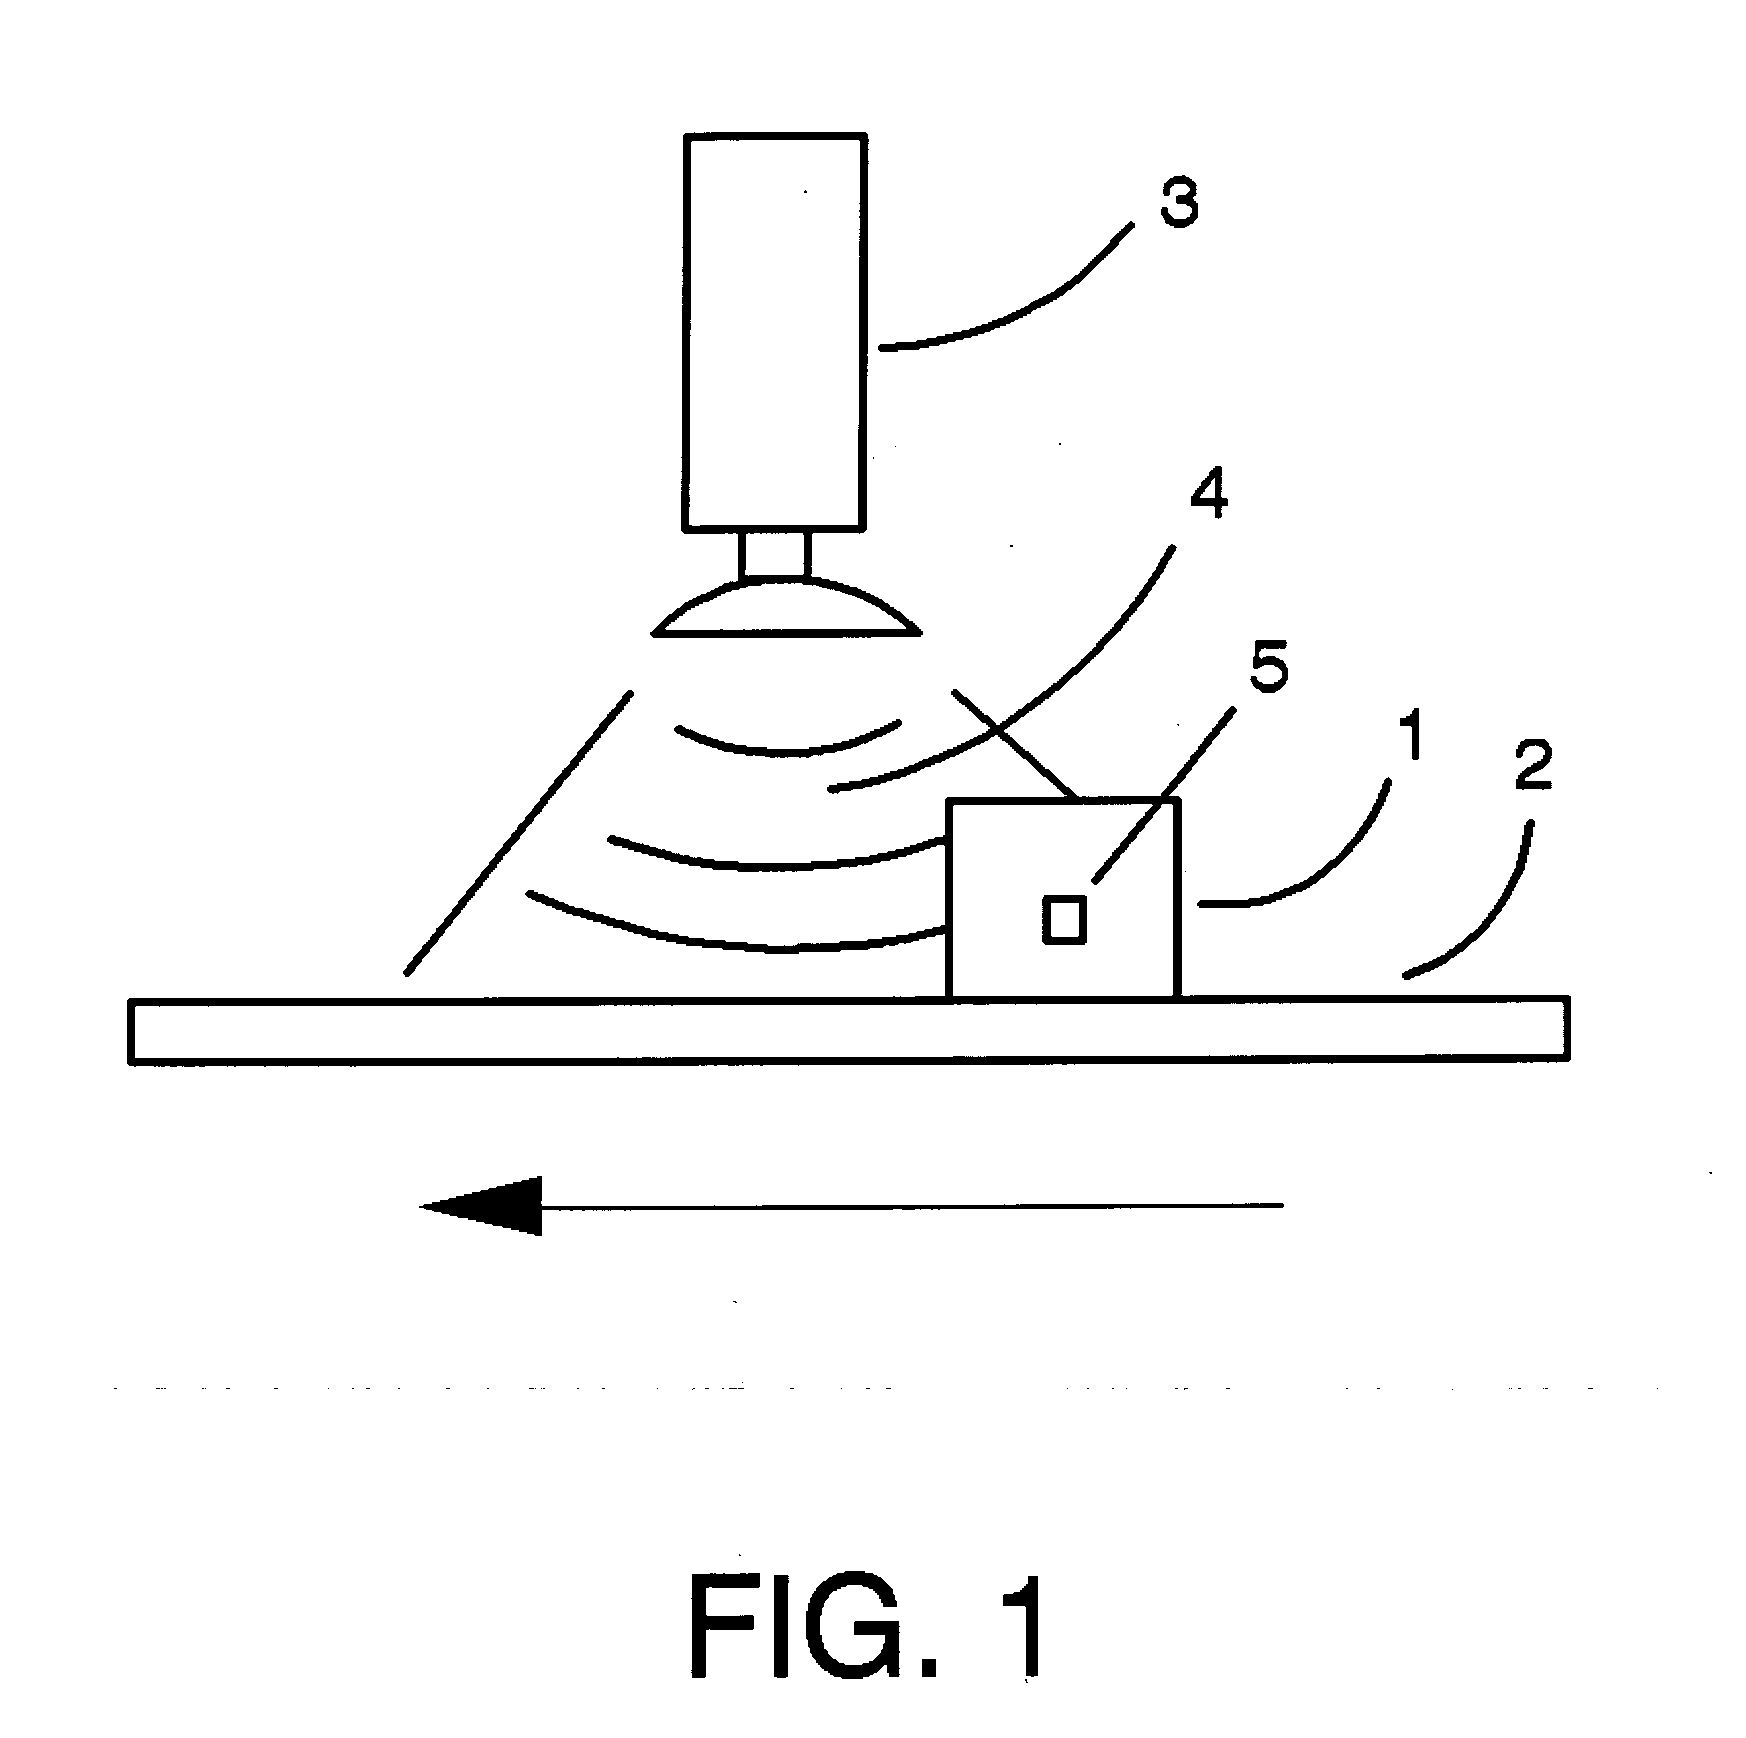 System and method for detecting and removing or disabling RFID tags